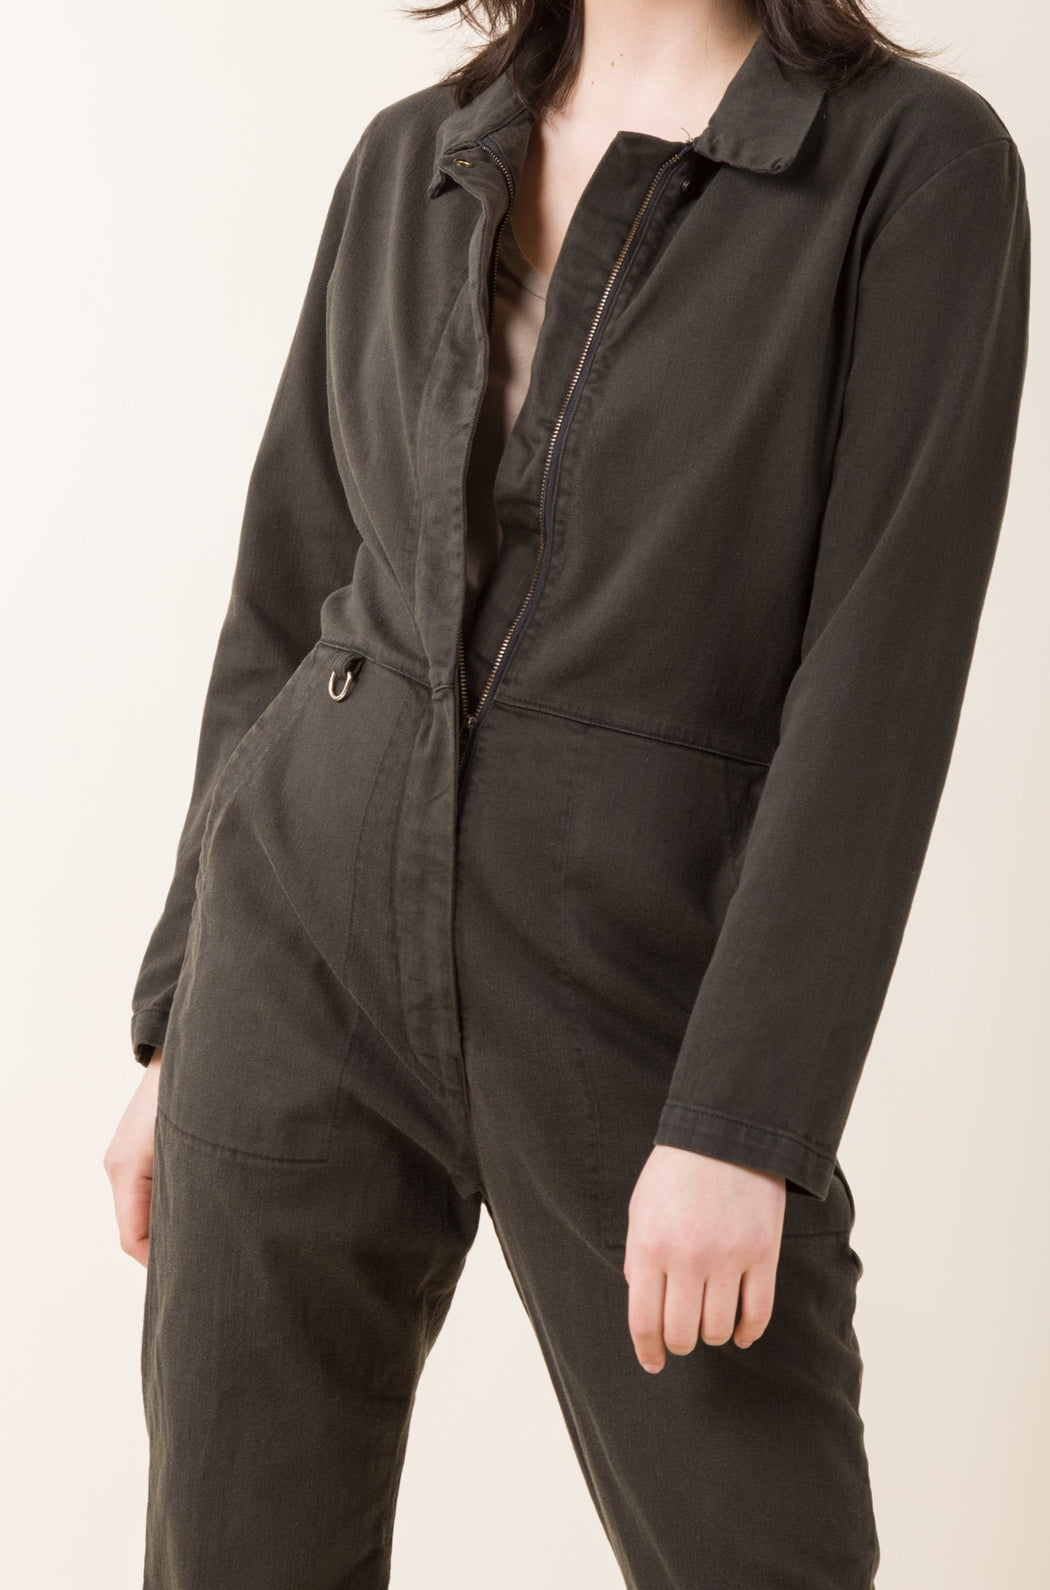 This version of our Denim Coveralls is nipped and darted with a high waist and fitted hip. Bulletproof luxury that is ready for anything, we stripped back details to create the perfect basic coverall.